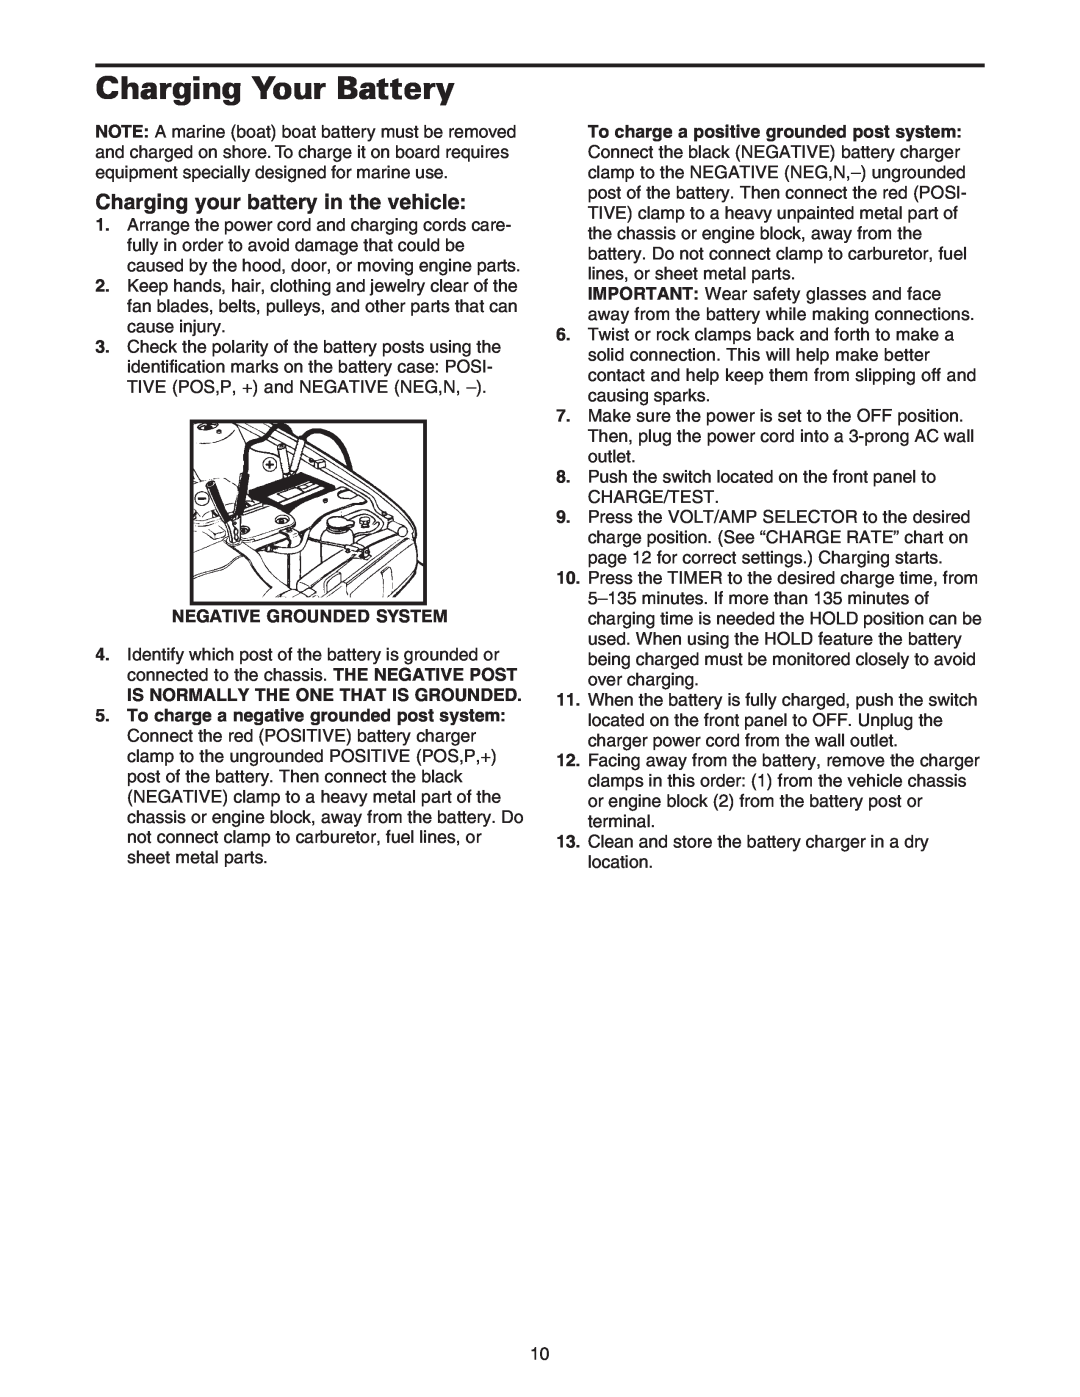 Sears 200.71233 owner manual Charging Your Battery, Charging your battery in the vehicle, Negative Grounded System 